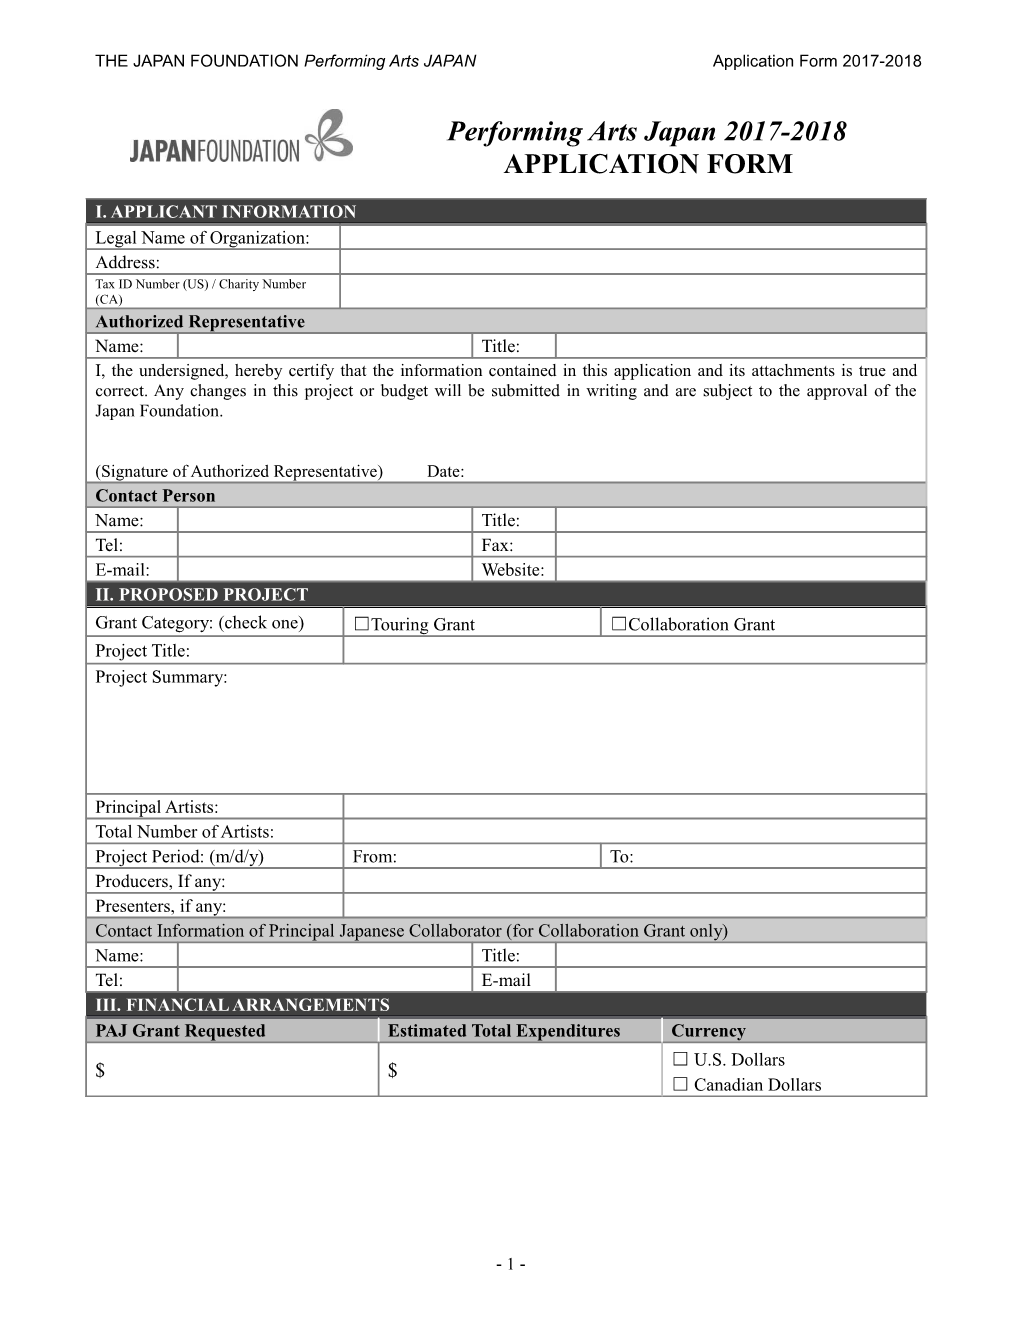 THE JAPAN FOUNDATION Performing Arts JAPAN Application Form2017-2018